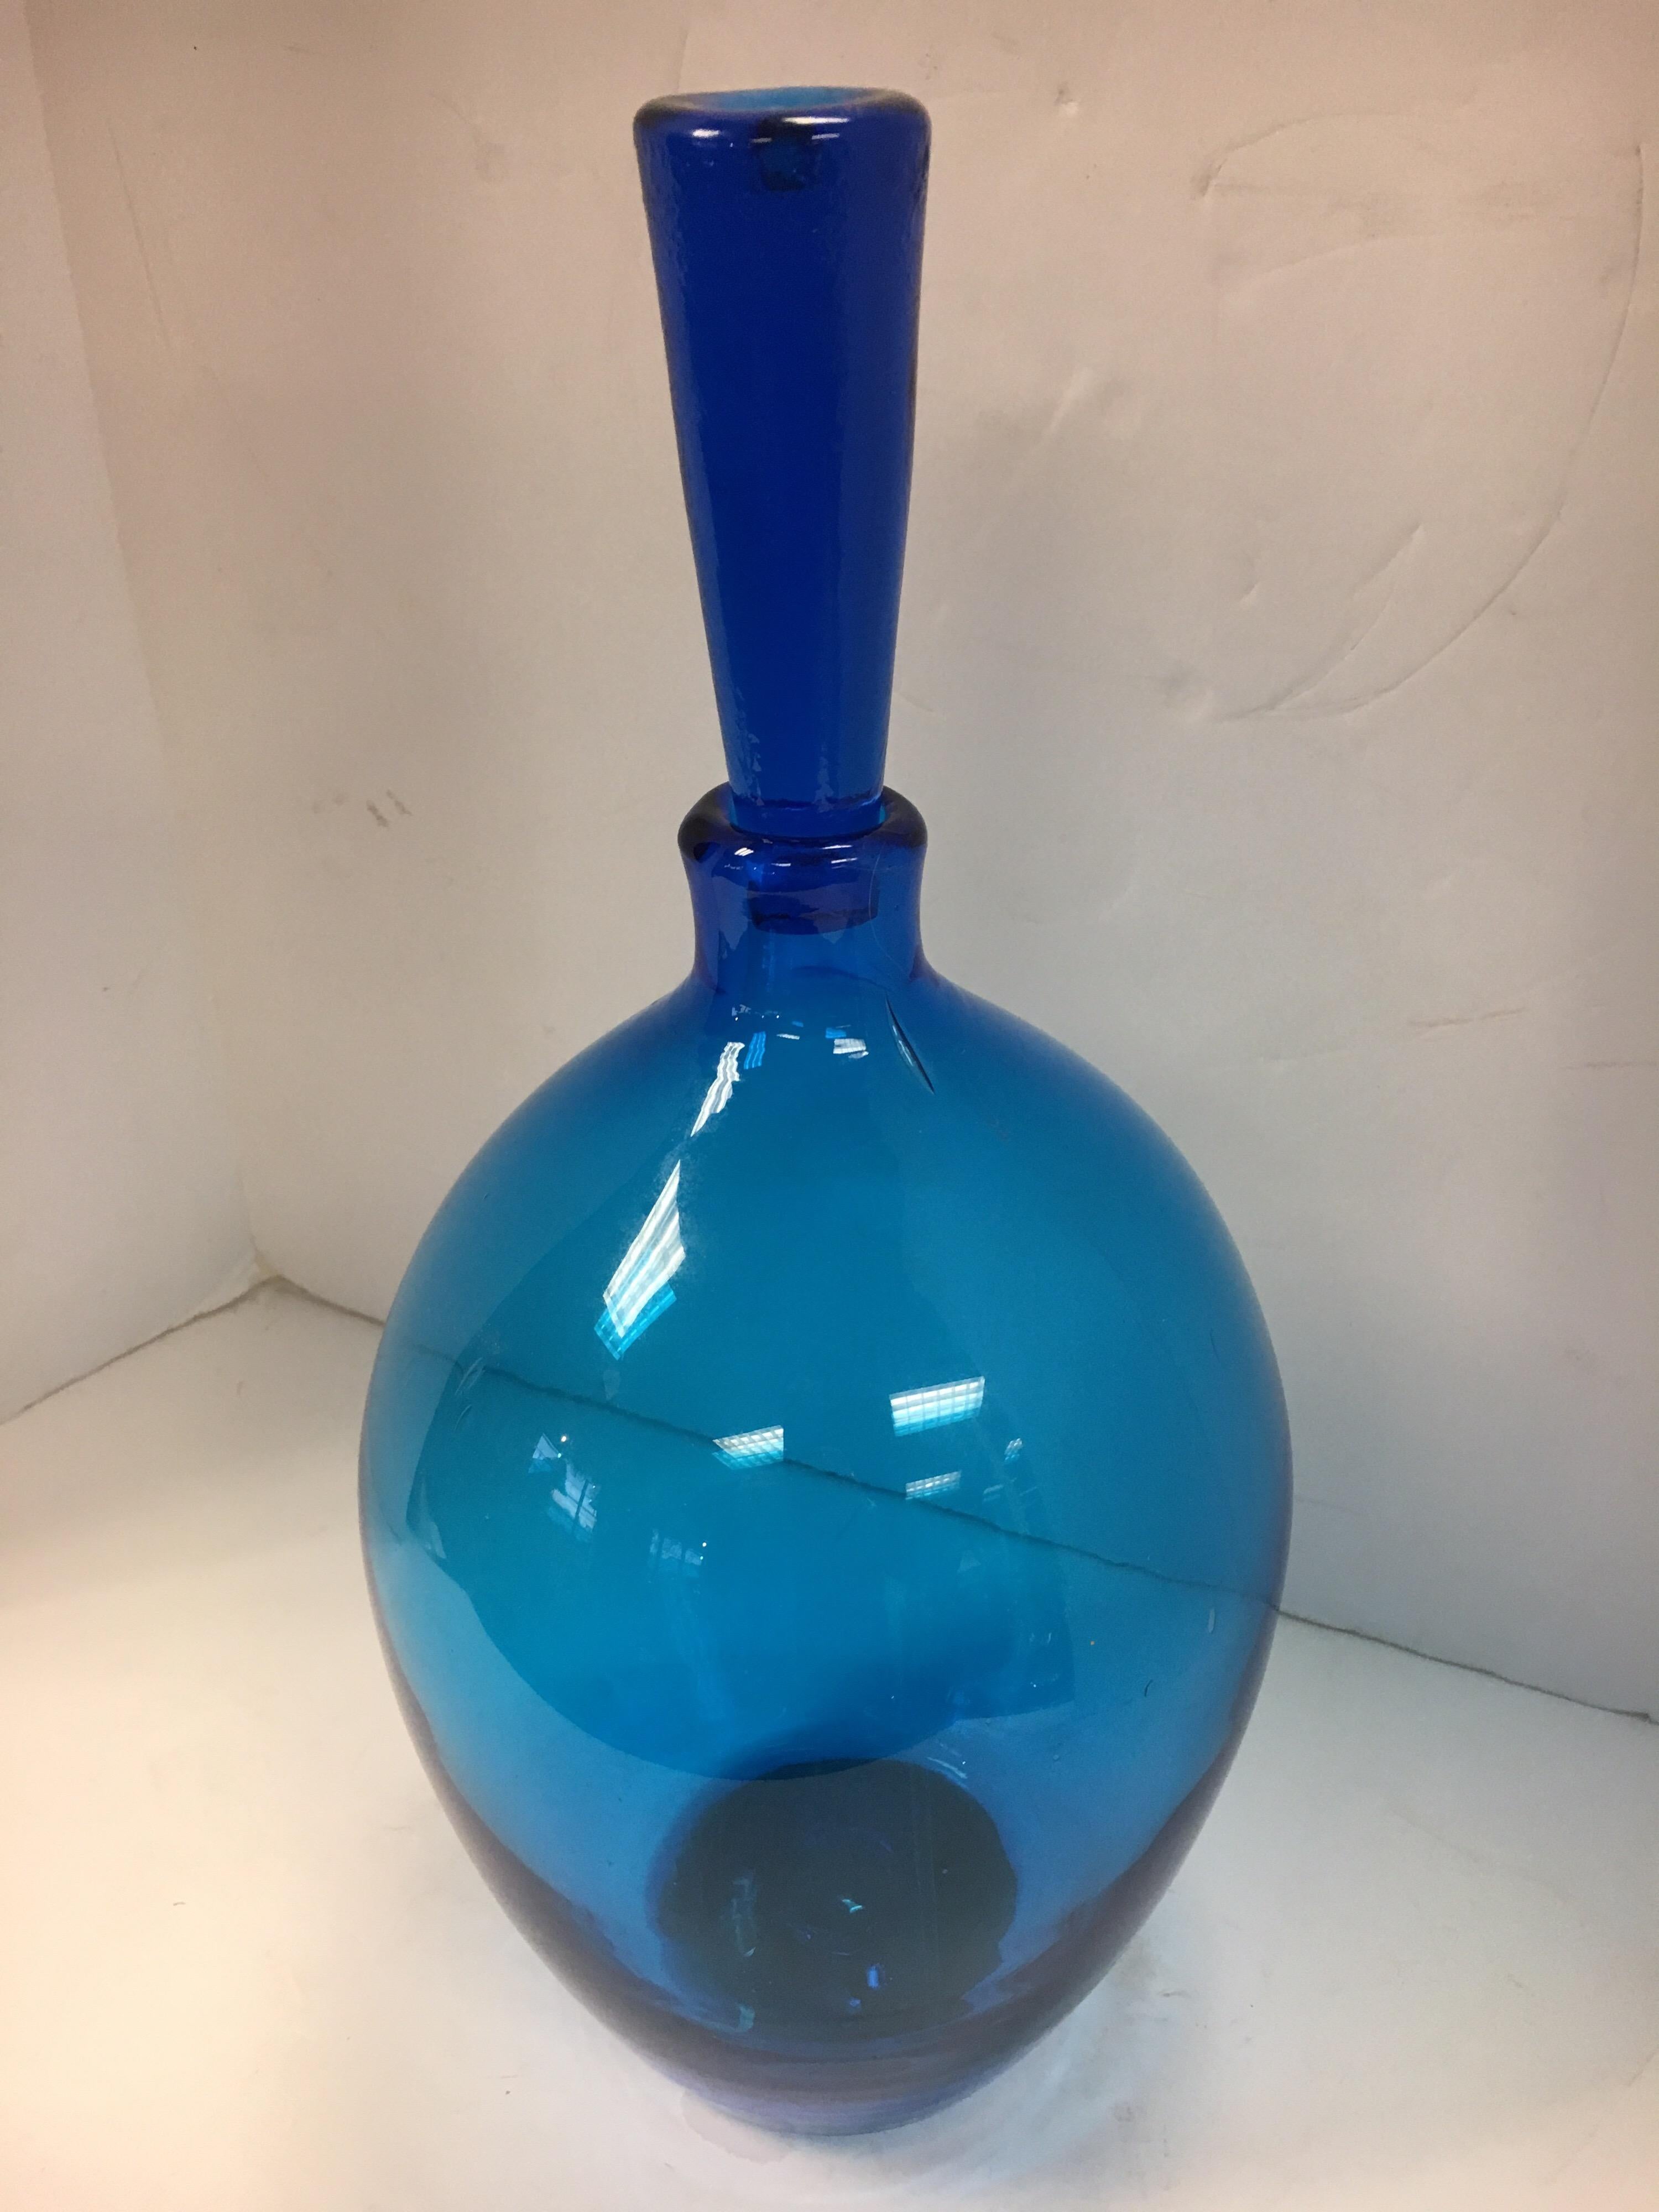 Made in Italy blue glass decanter with cap.